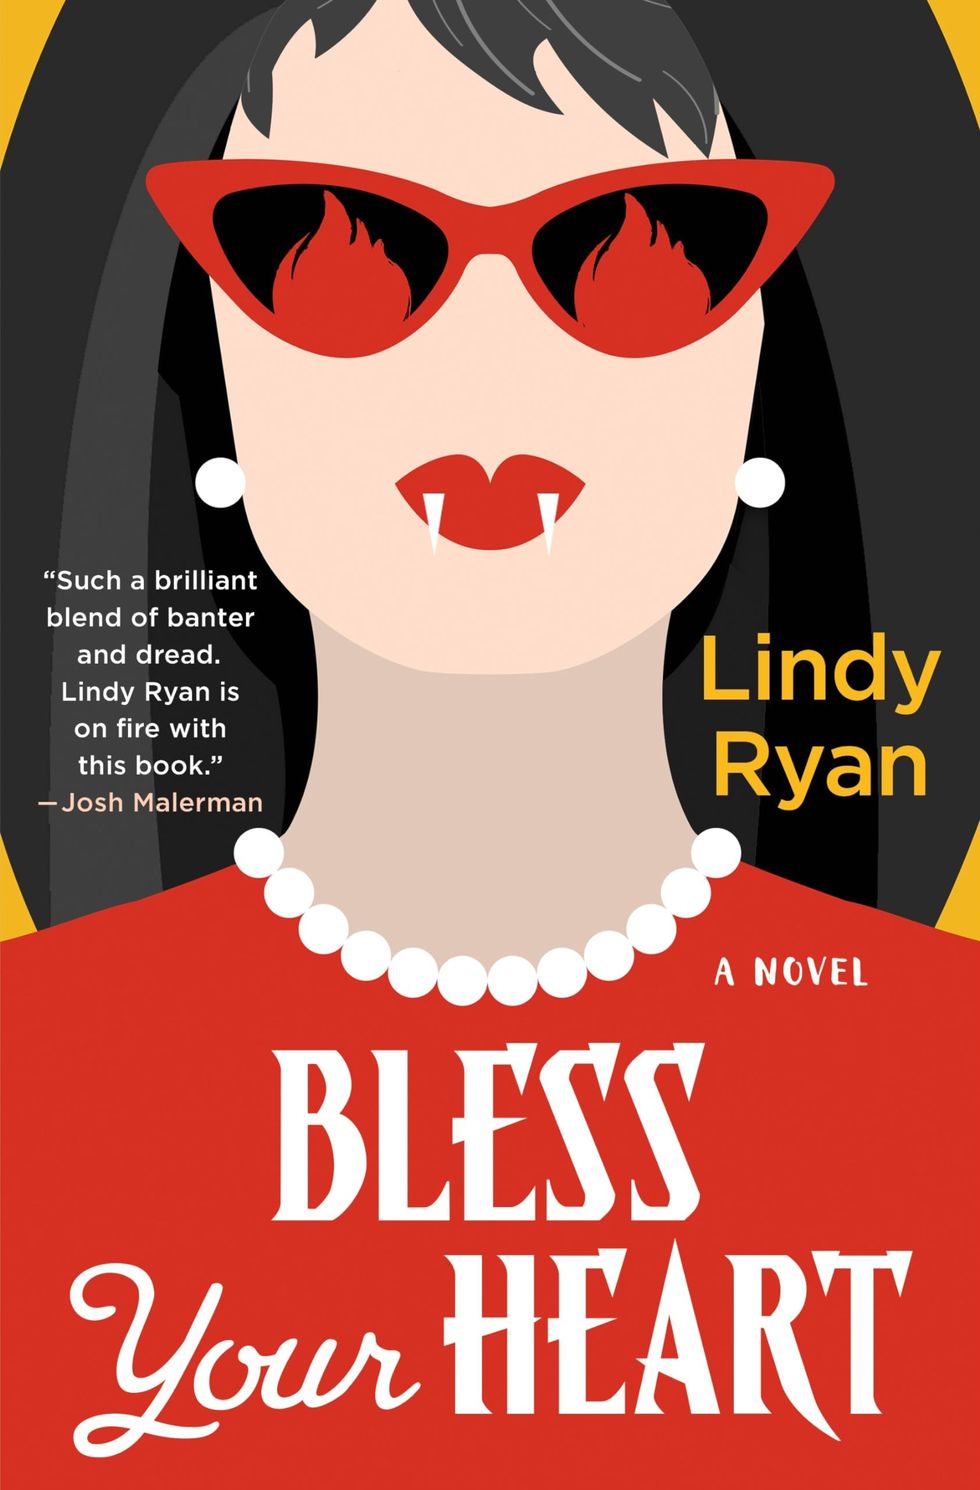 Bless Your Heart, by Lindy Ryan